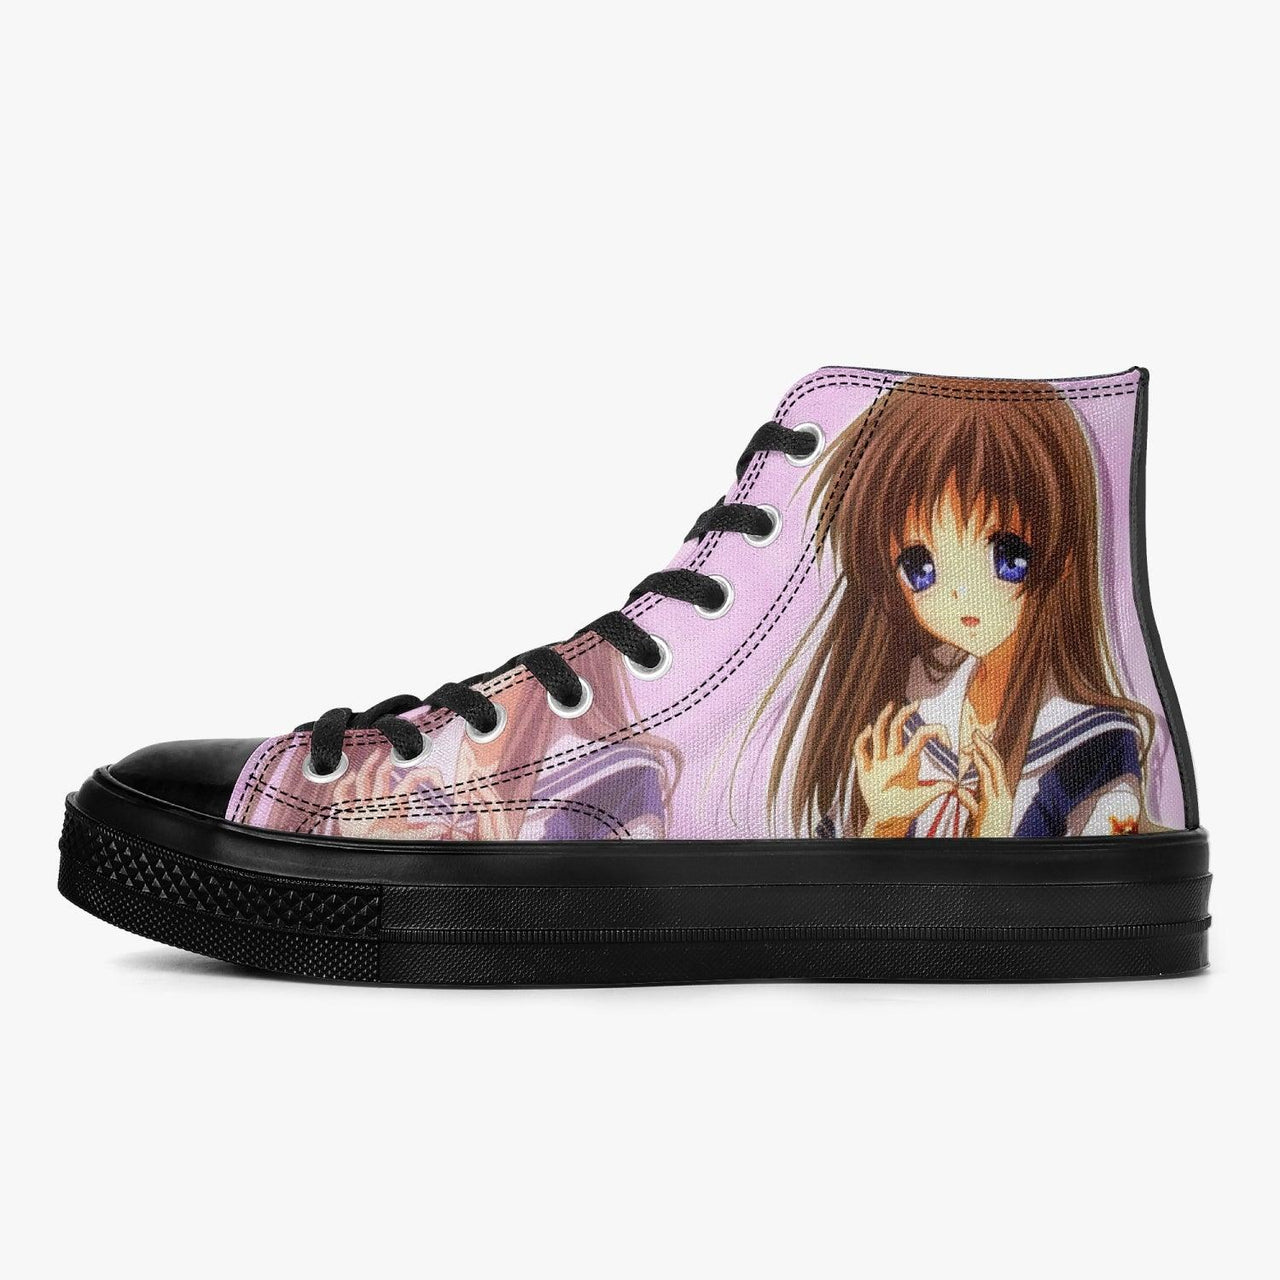 Clannad After Story A-Star High Anime Shoes _ Clannad _ Ayuko